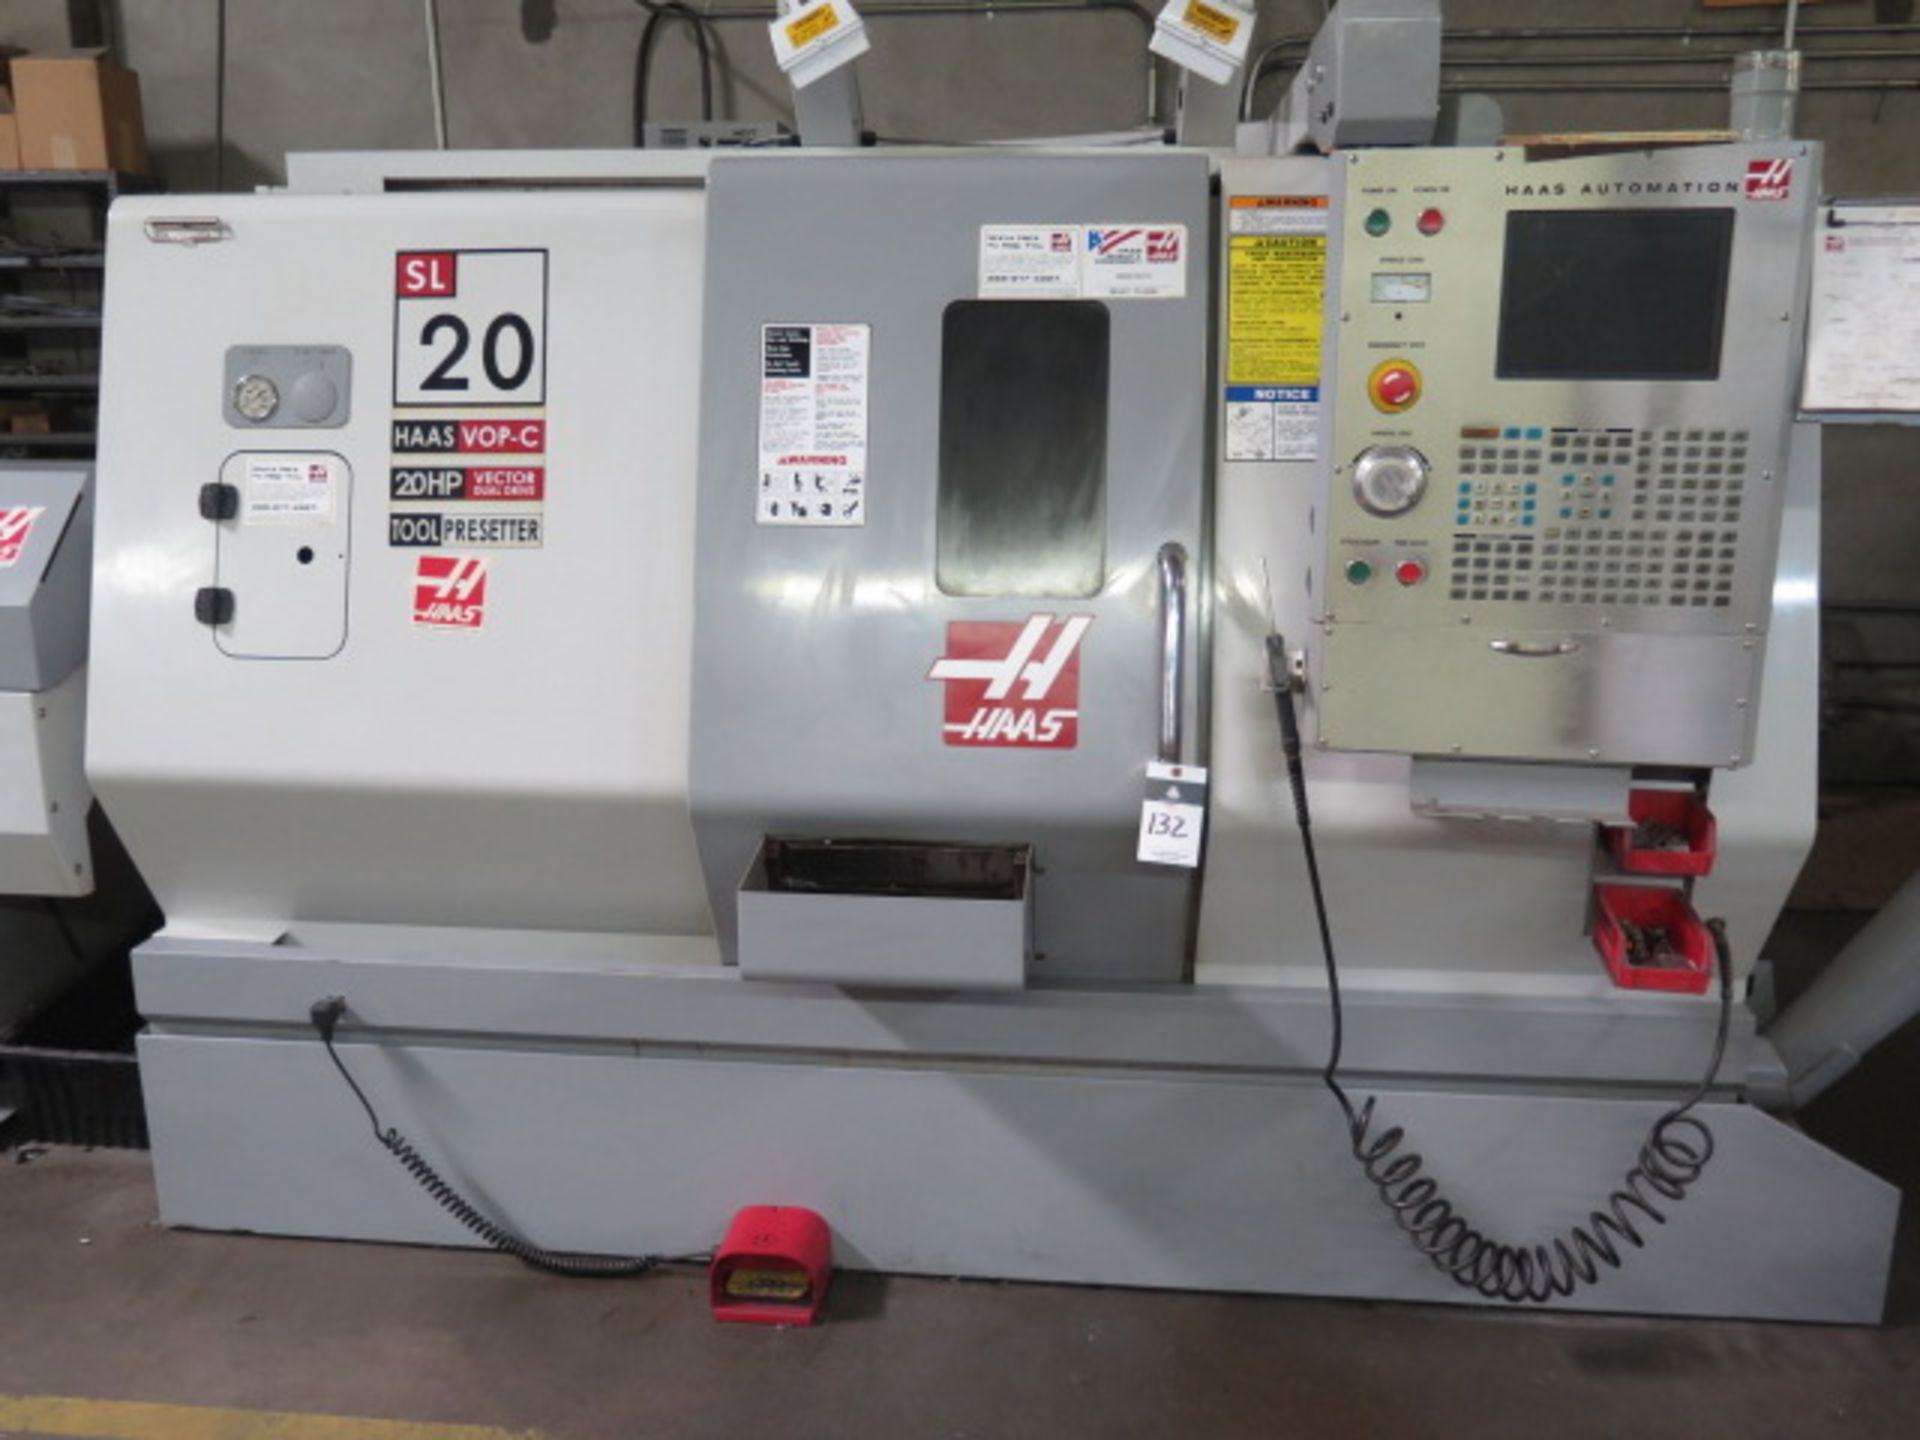 2006 Haas SL-20 CNC Turning Center s/n 73236 w/ Haas Controls, Tool Presetter, 10-Station Turret, - Image 2 of 17